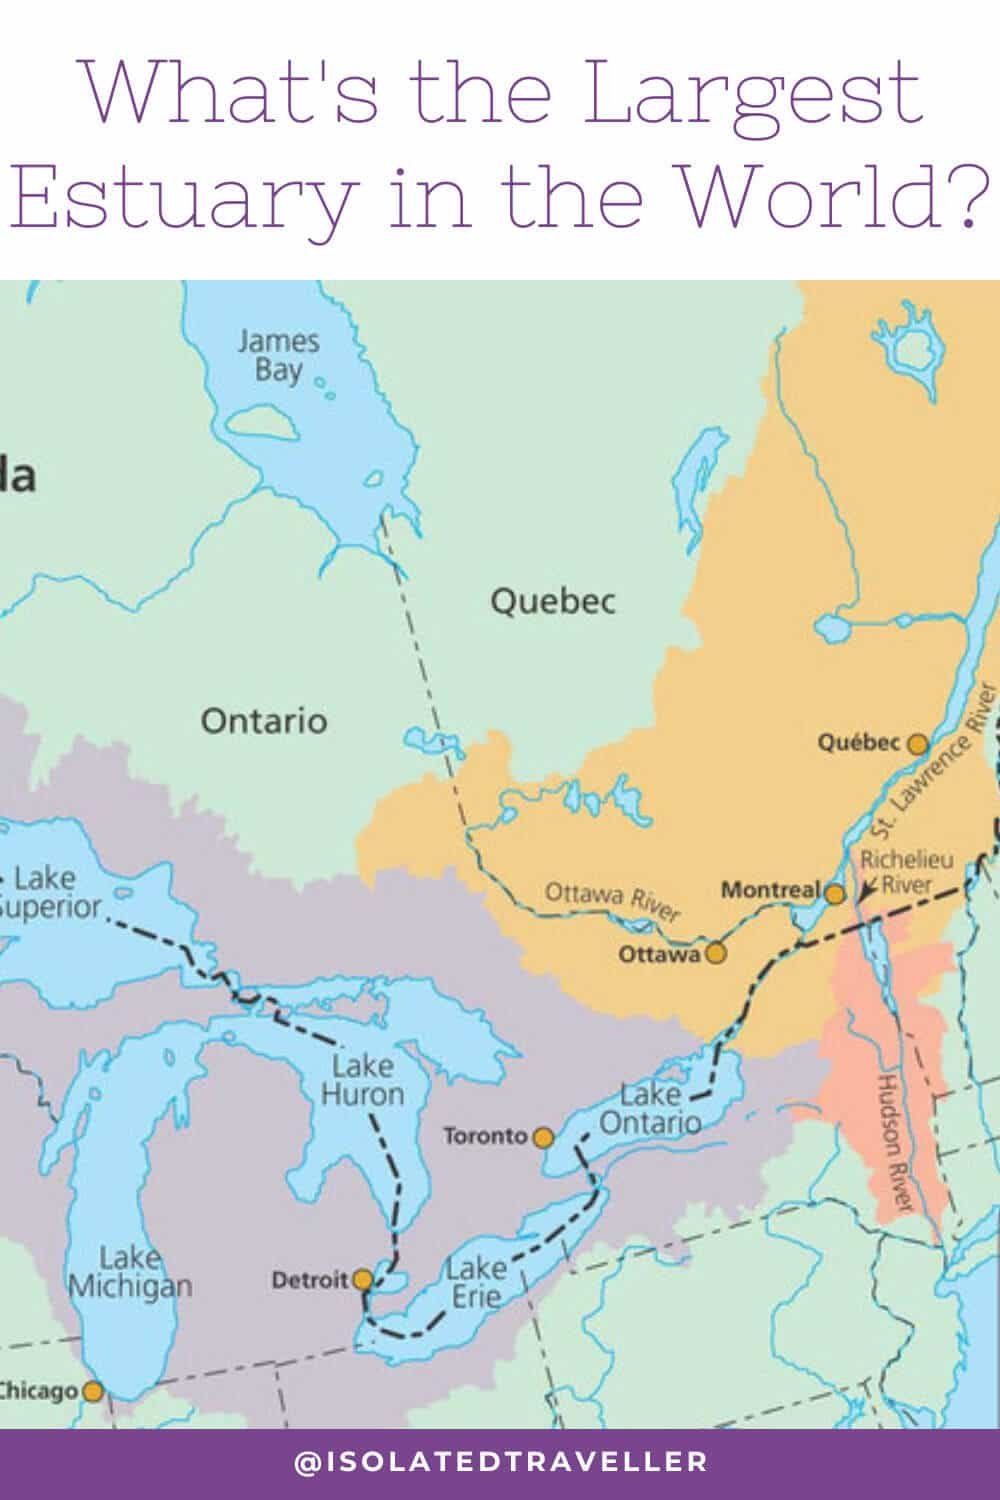 What's the largest estuary in the world?